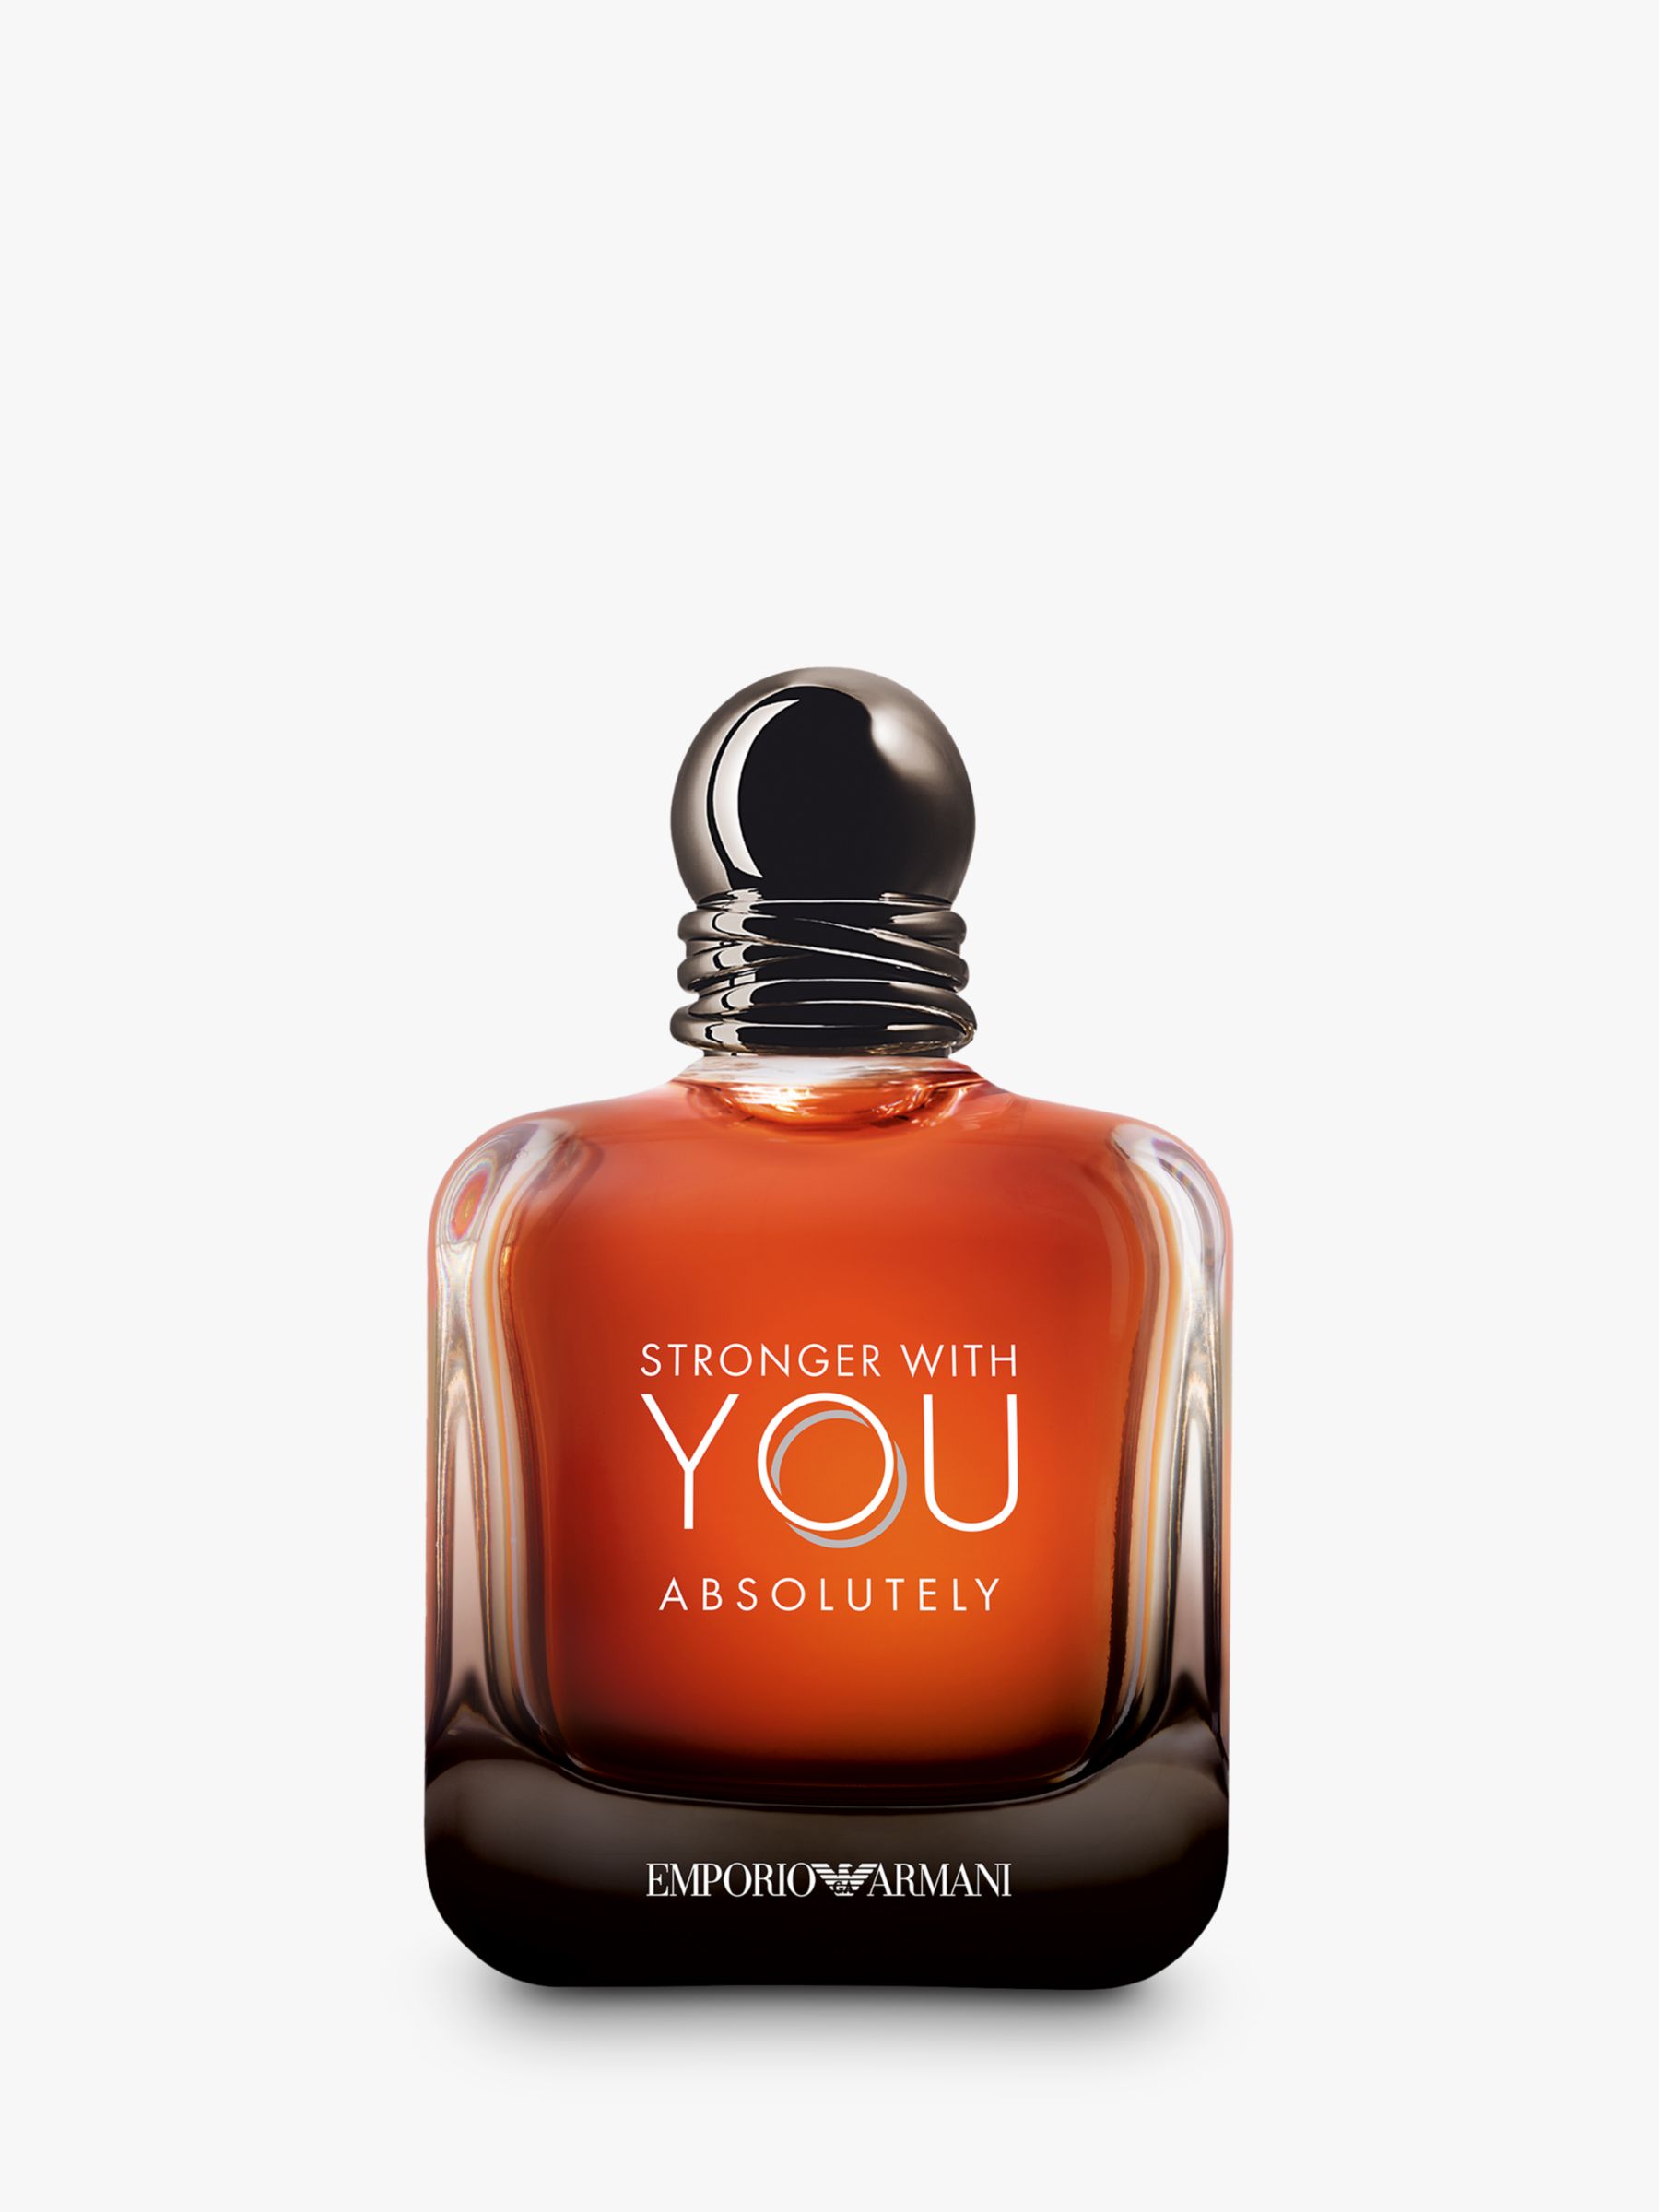 Emporio Armani Stronger With You Absolutely Parfum, 100ml 1